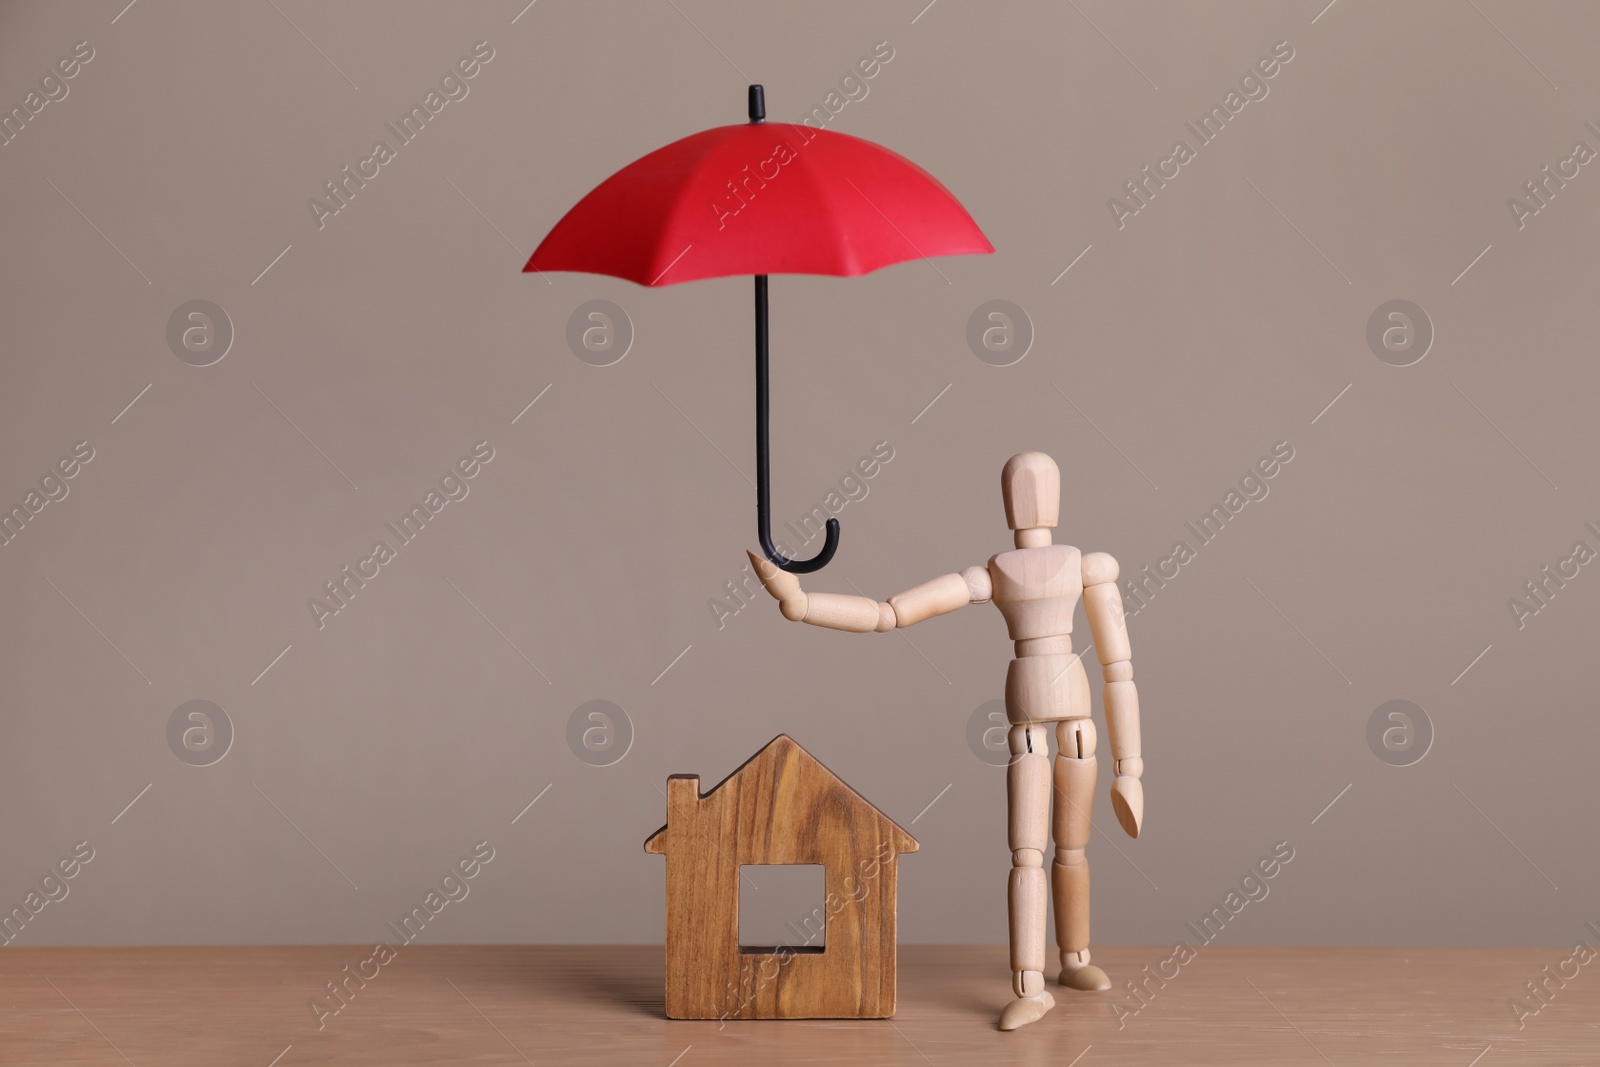 Photo of Mannequin holding small umbrella over house figure on wooden table